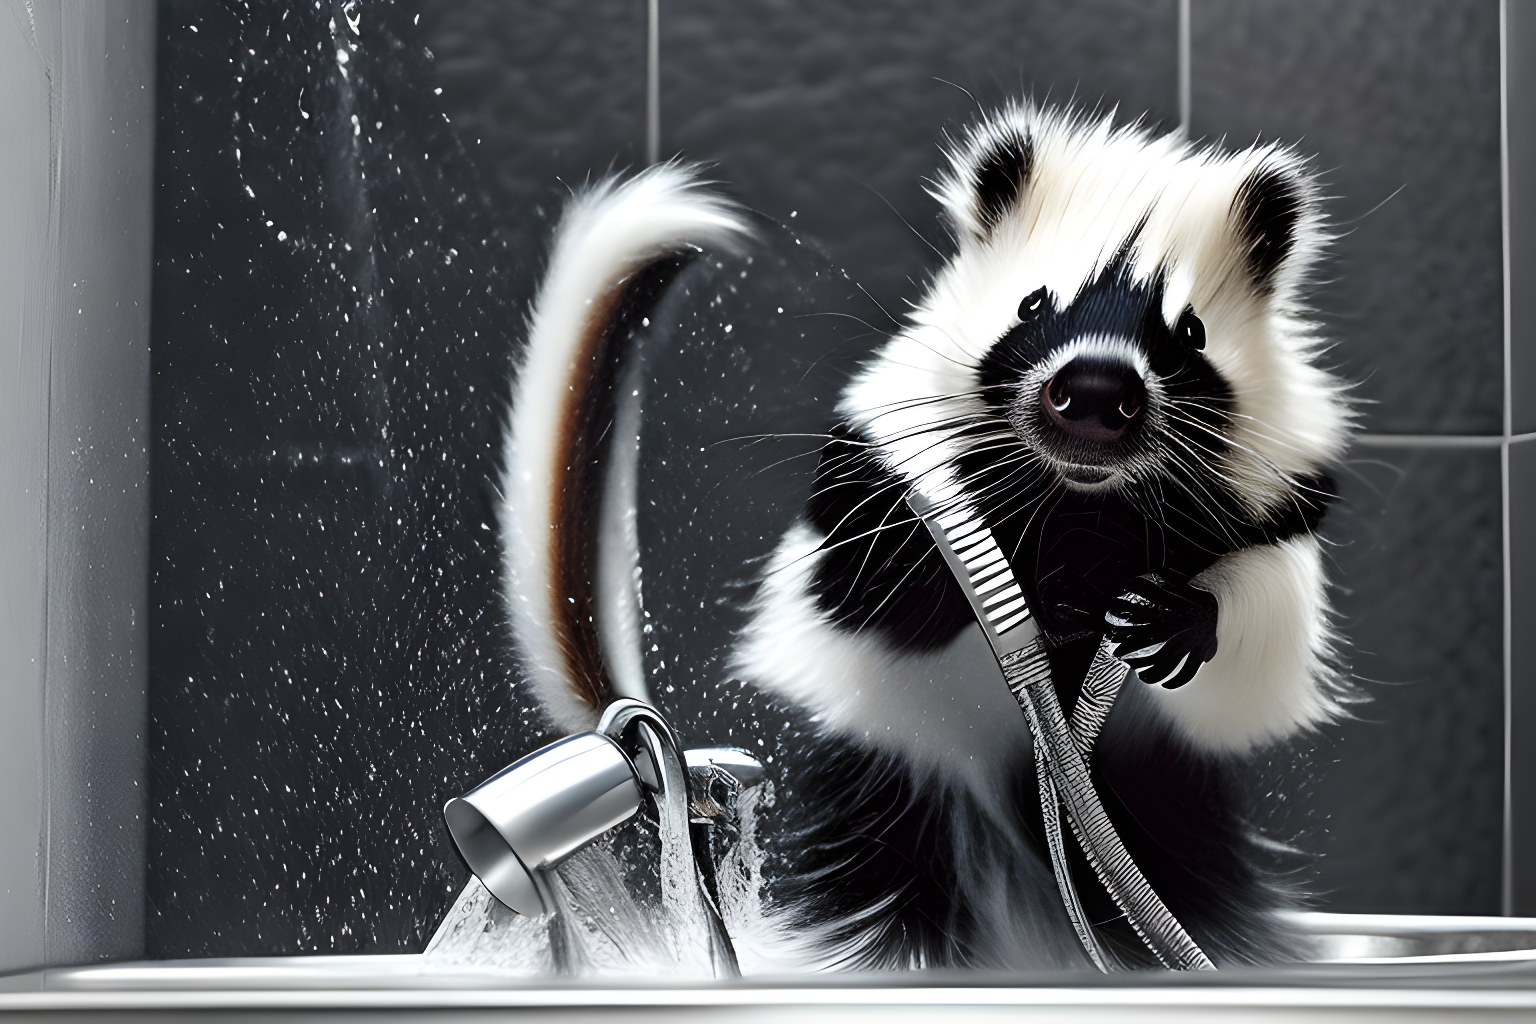 mdjrny-v4 style a skunk on a shower taking a bath